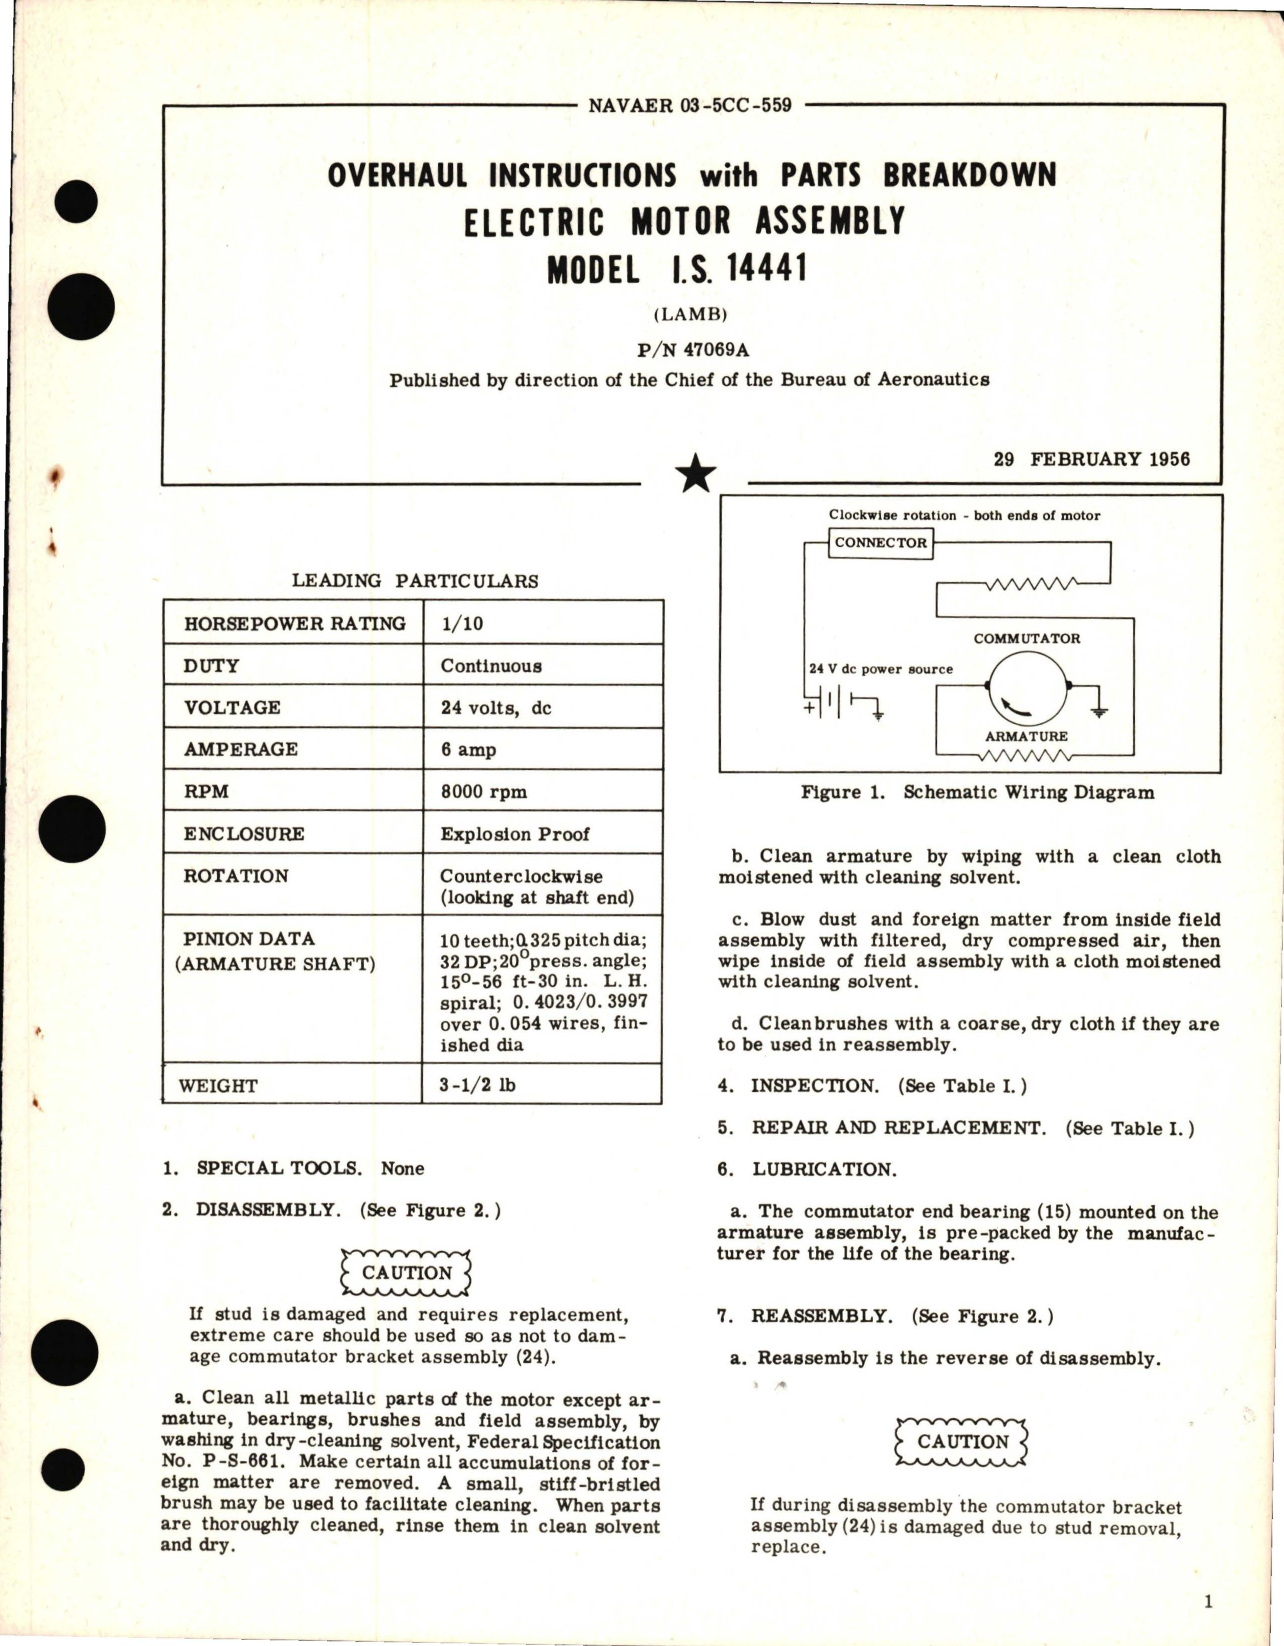 Sample page 1 from AirCorps Library document: Overhaul Instructions with Parts Breakdown for Electric Motor Assembly - Model I.S. 14441 - Part 47069A